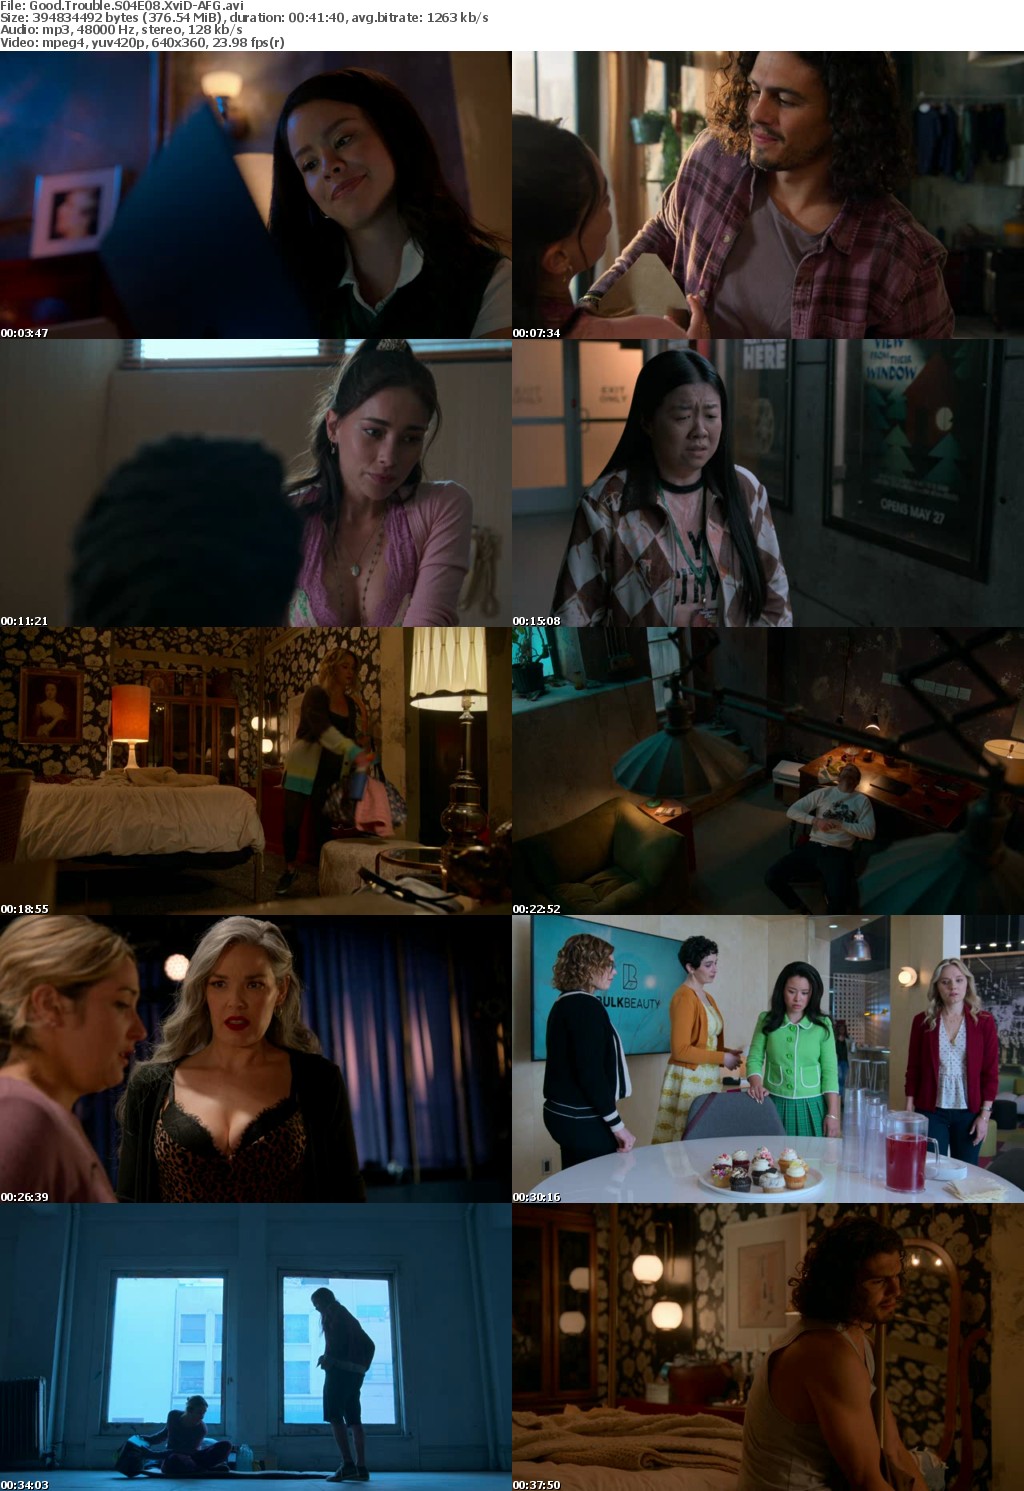 Good Trouble S04E08 XviD-AFG